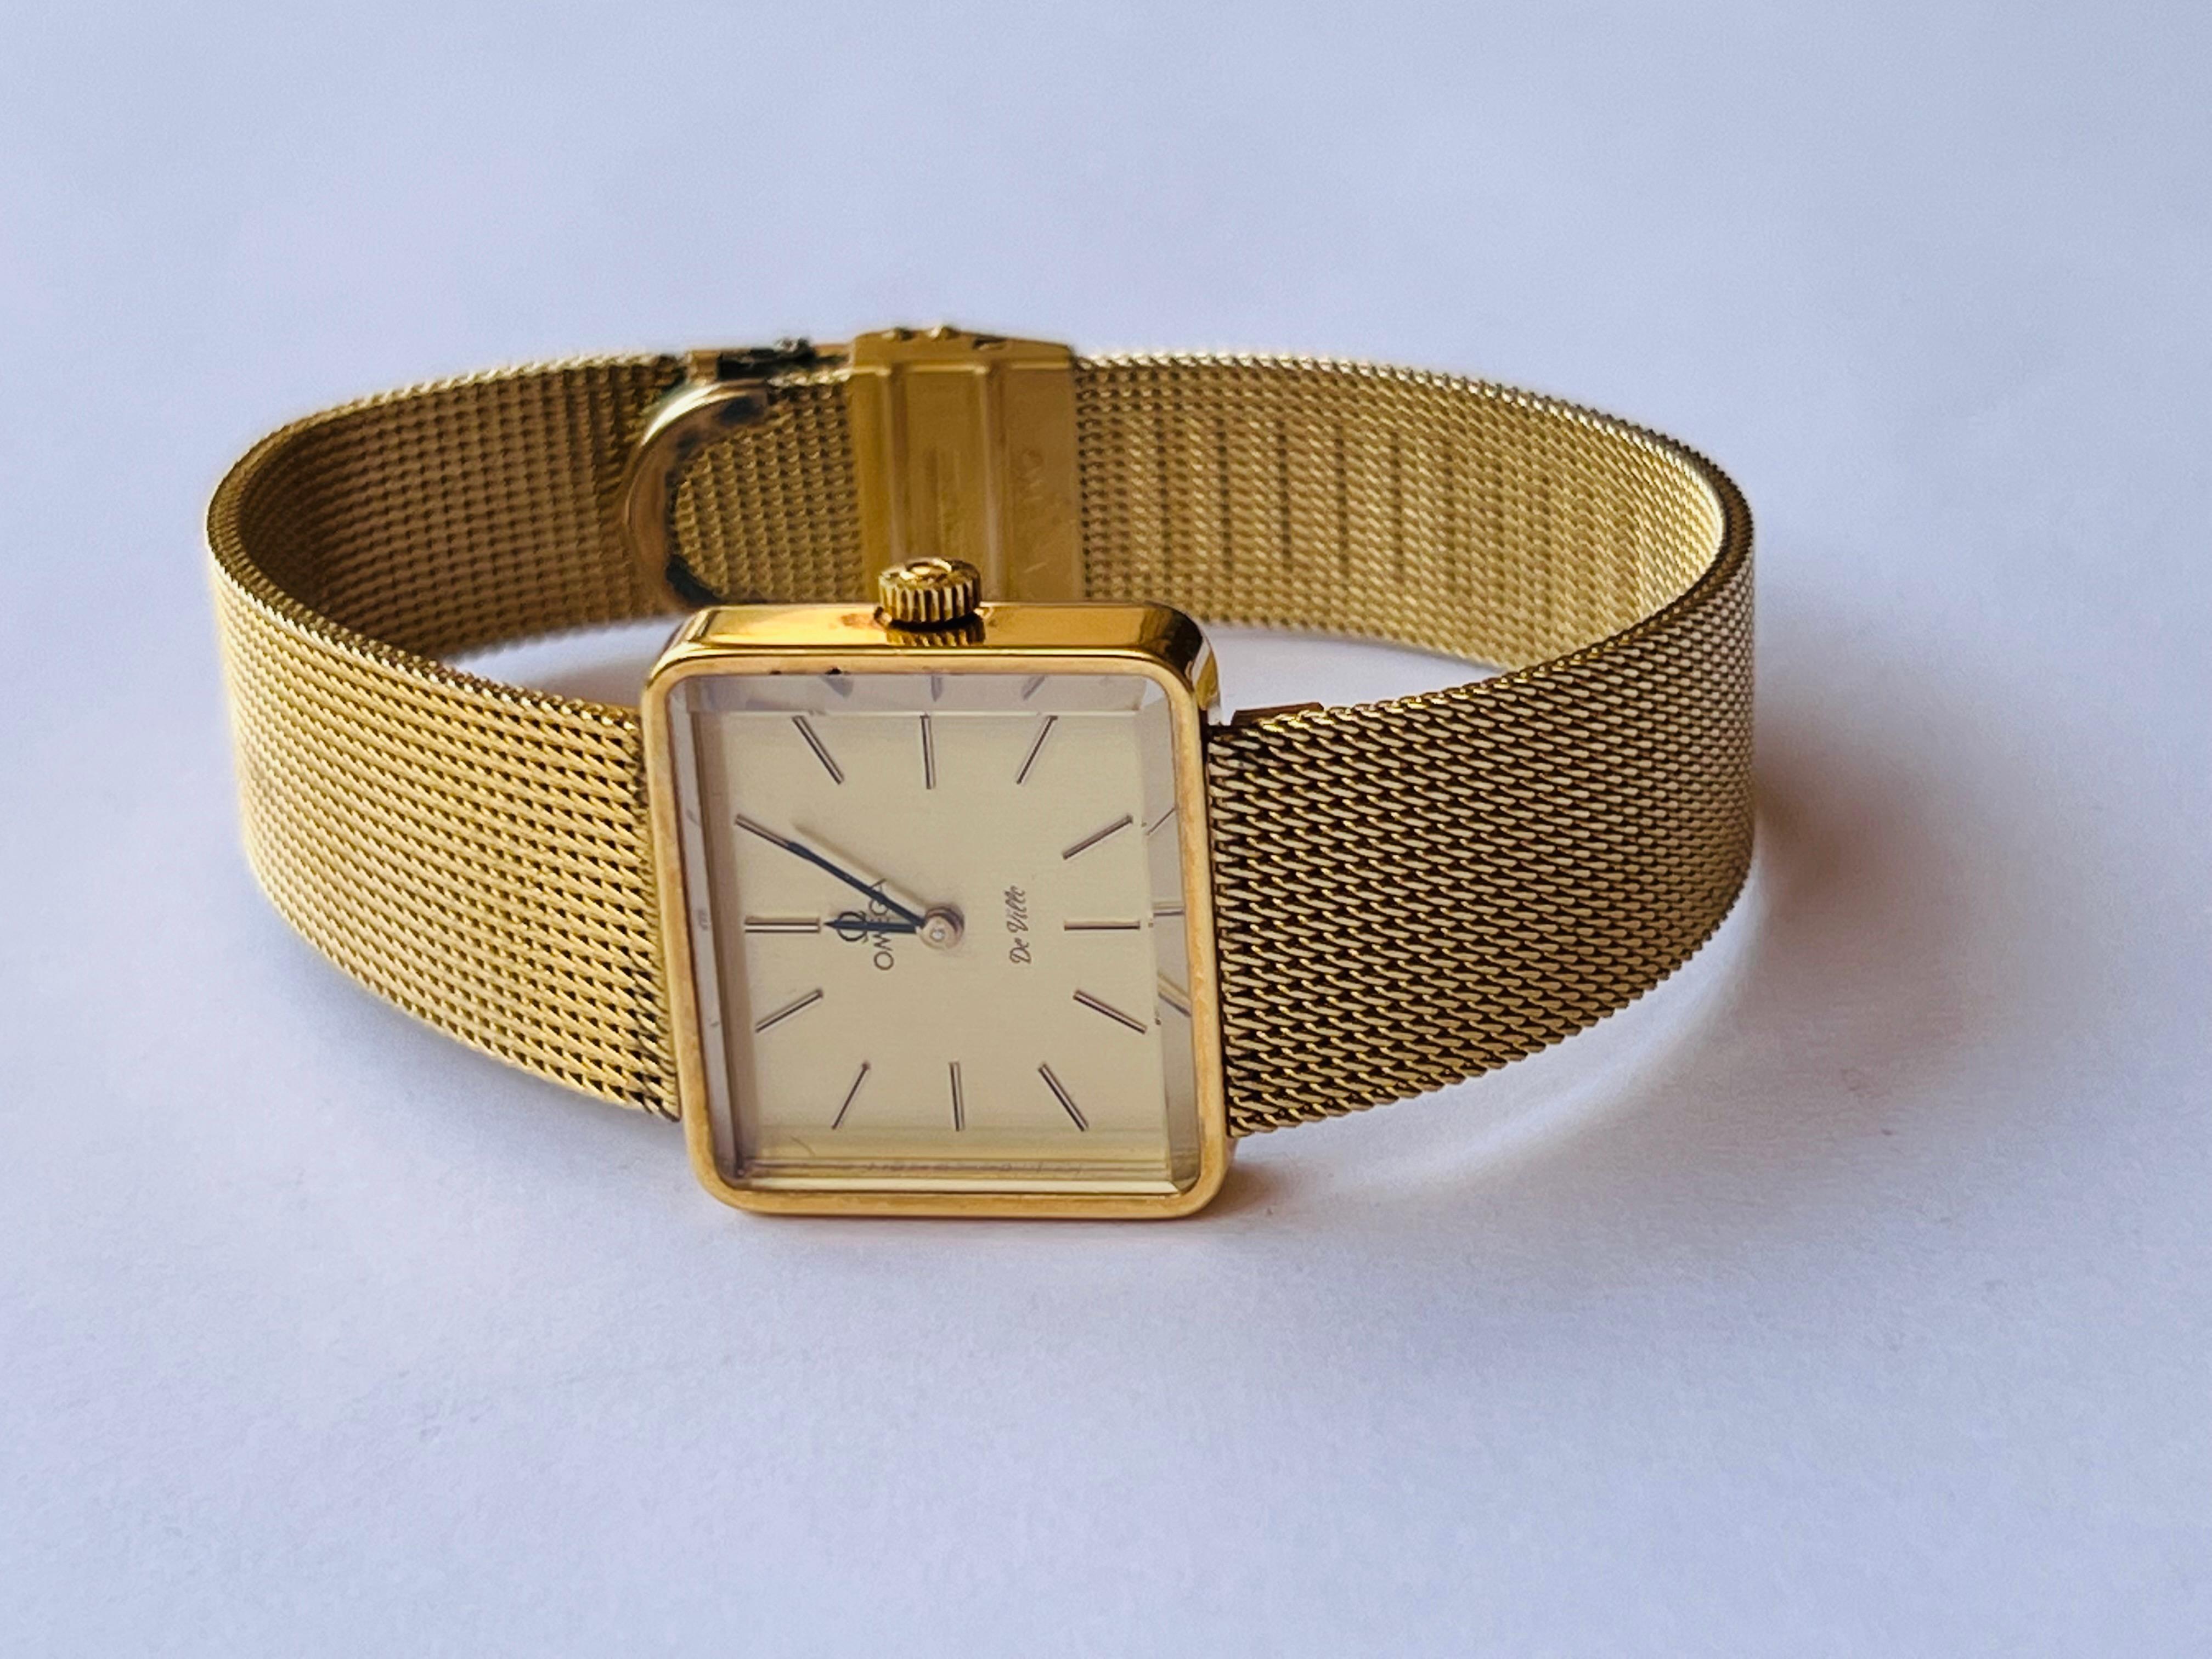 Brand : Omega 

Model:   De Ville  

Country Of Manufacture: Switzerland

Movement:  Handwind  

Case Material:   Gold Plated Stainless Steel

Measurements :25mm diameter (excluding crown )

Band Type : Omega SS with Marked buckle  

Band Condition